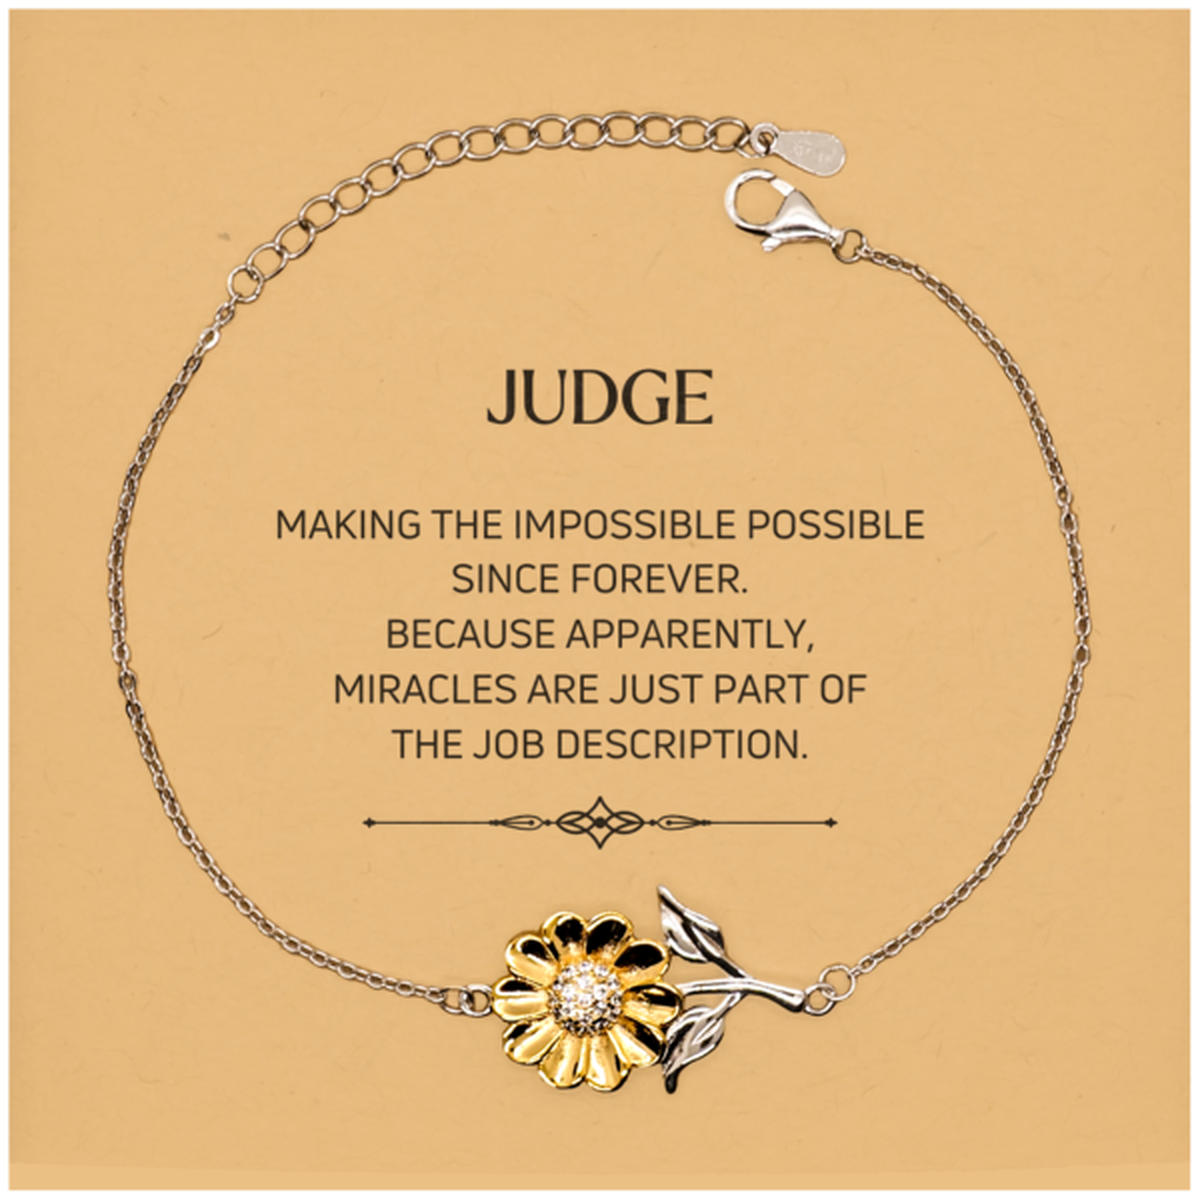 Funny Judge Gifts, Miracles are just part of the job description, Inspirational Birthday Christmas Sunflower Bracelet For Judge, Men, Women, Coworkers, Friends, Boss